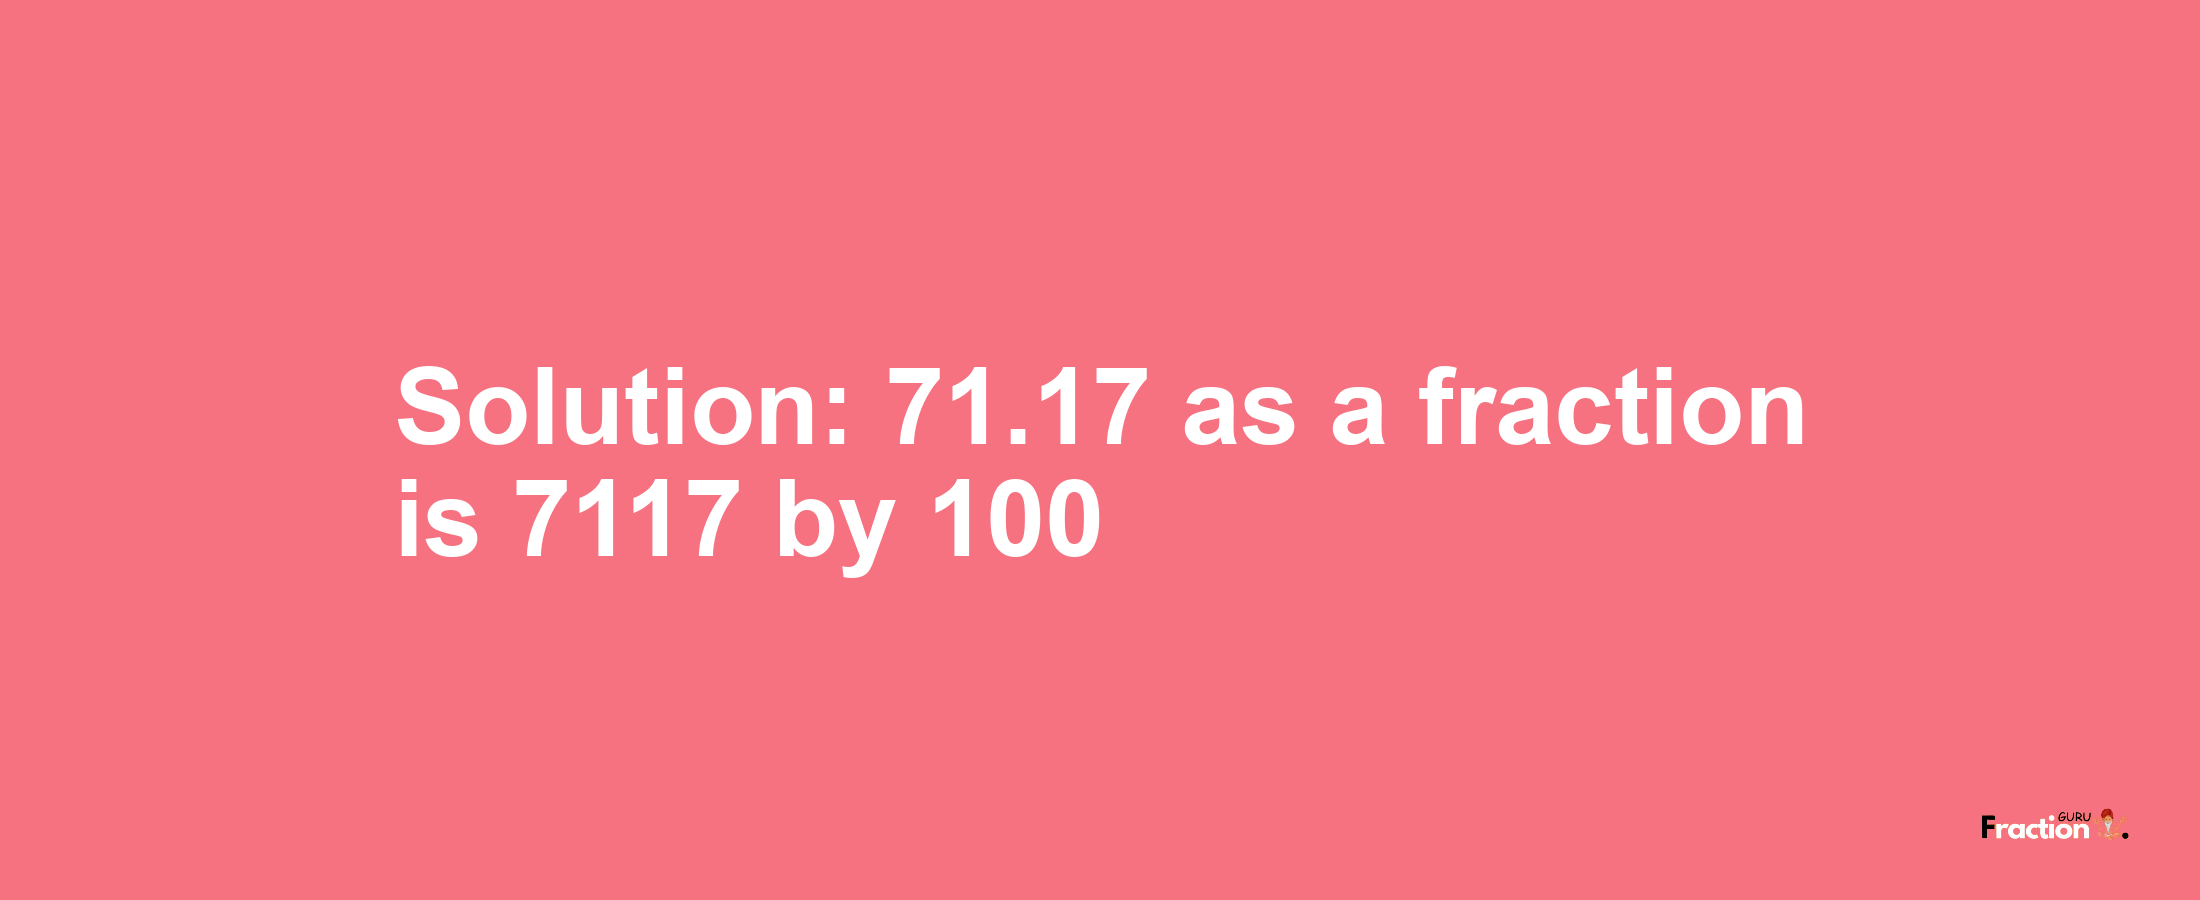 Solution:71.17 as a fraction is 7117/100